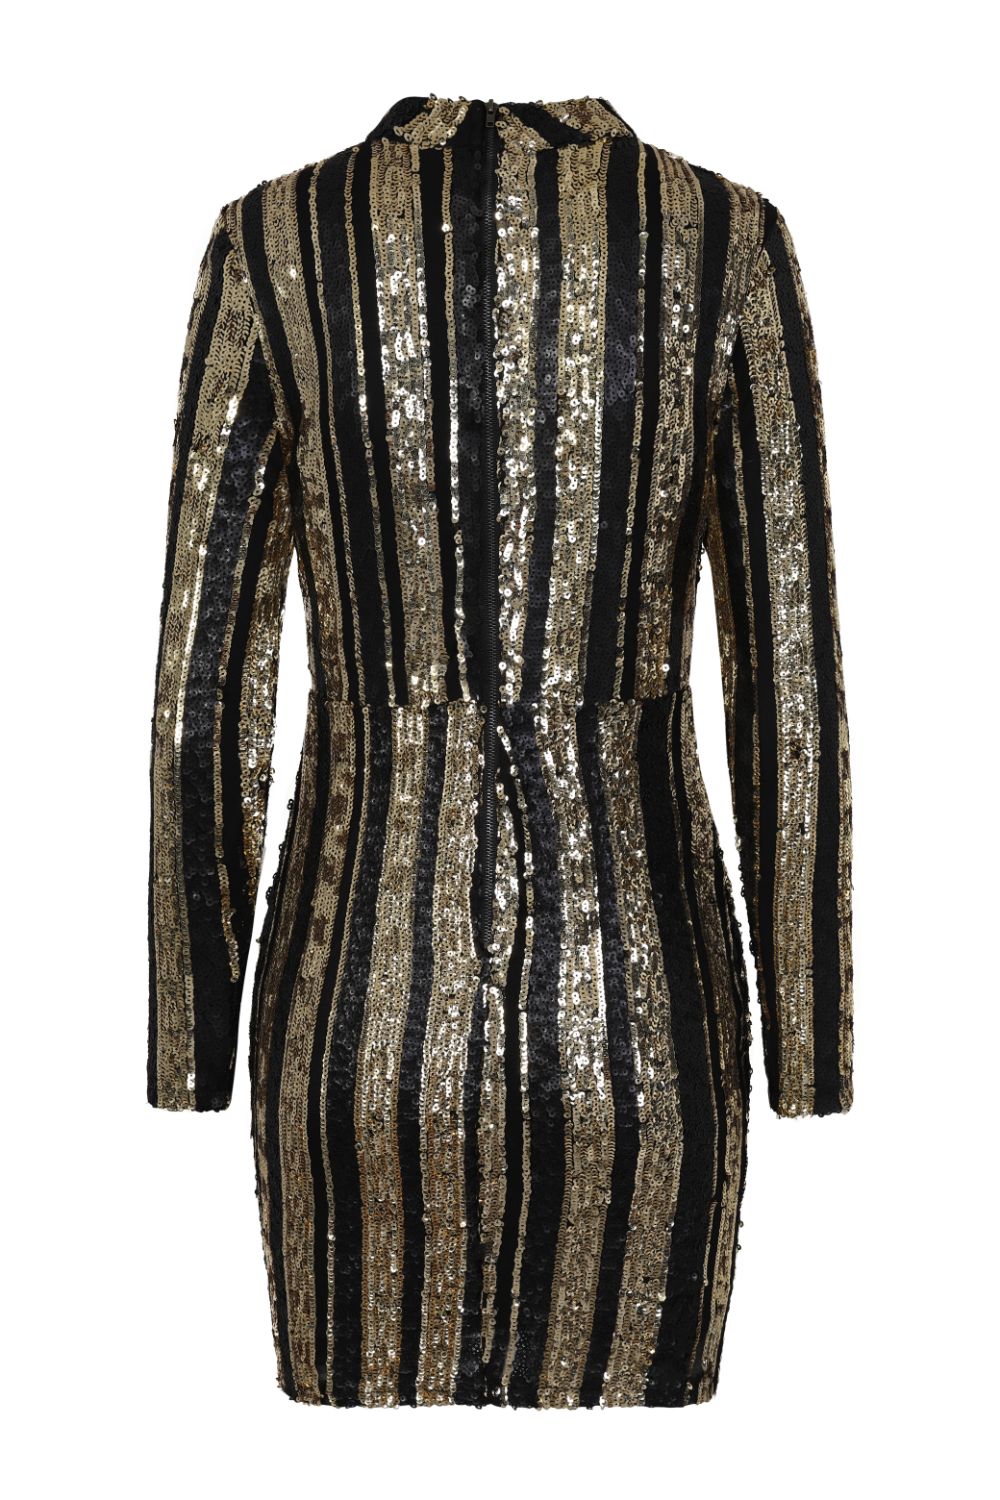 Turn Up Black Gold Striped Sequin Bodycon Dress